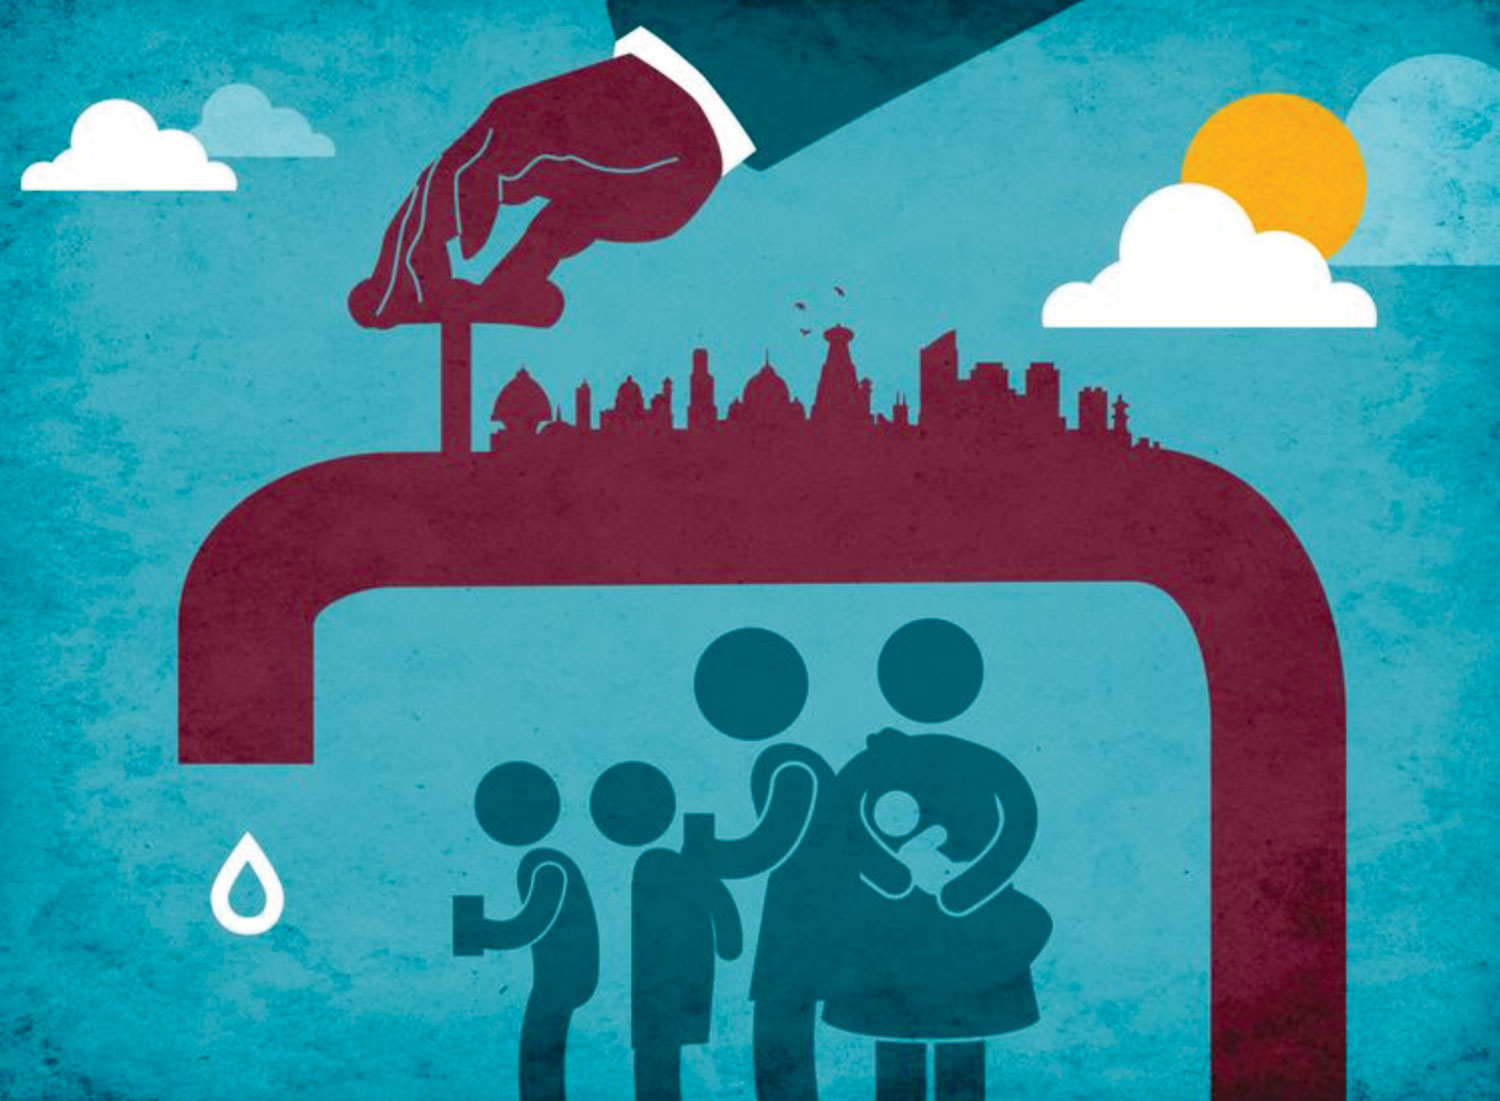 Illustration of a family under a city landscape that turns into a water faucet. A hand is reaching down from the sky to turn the faucet on